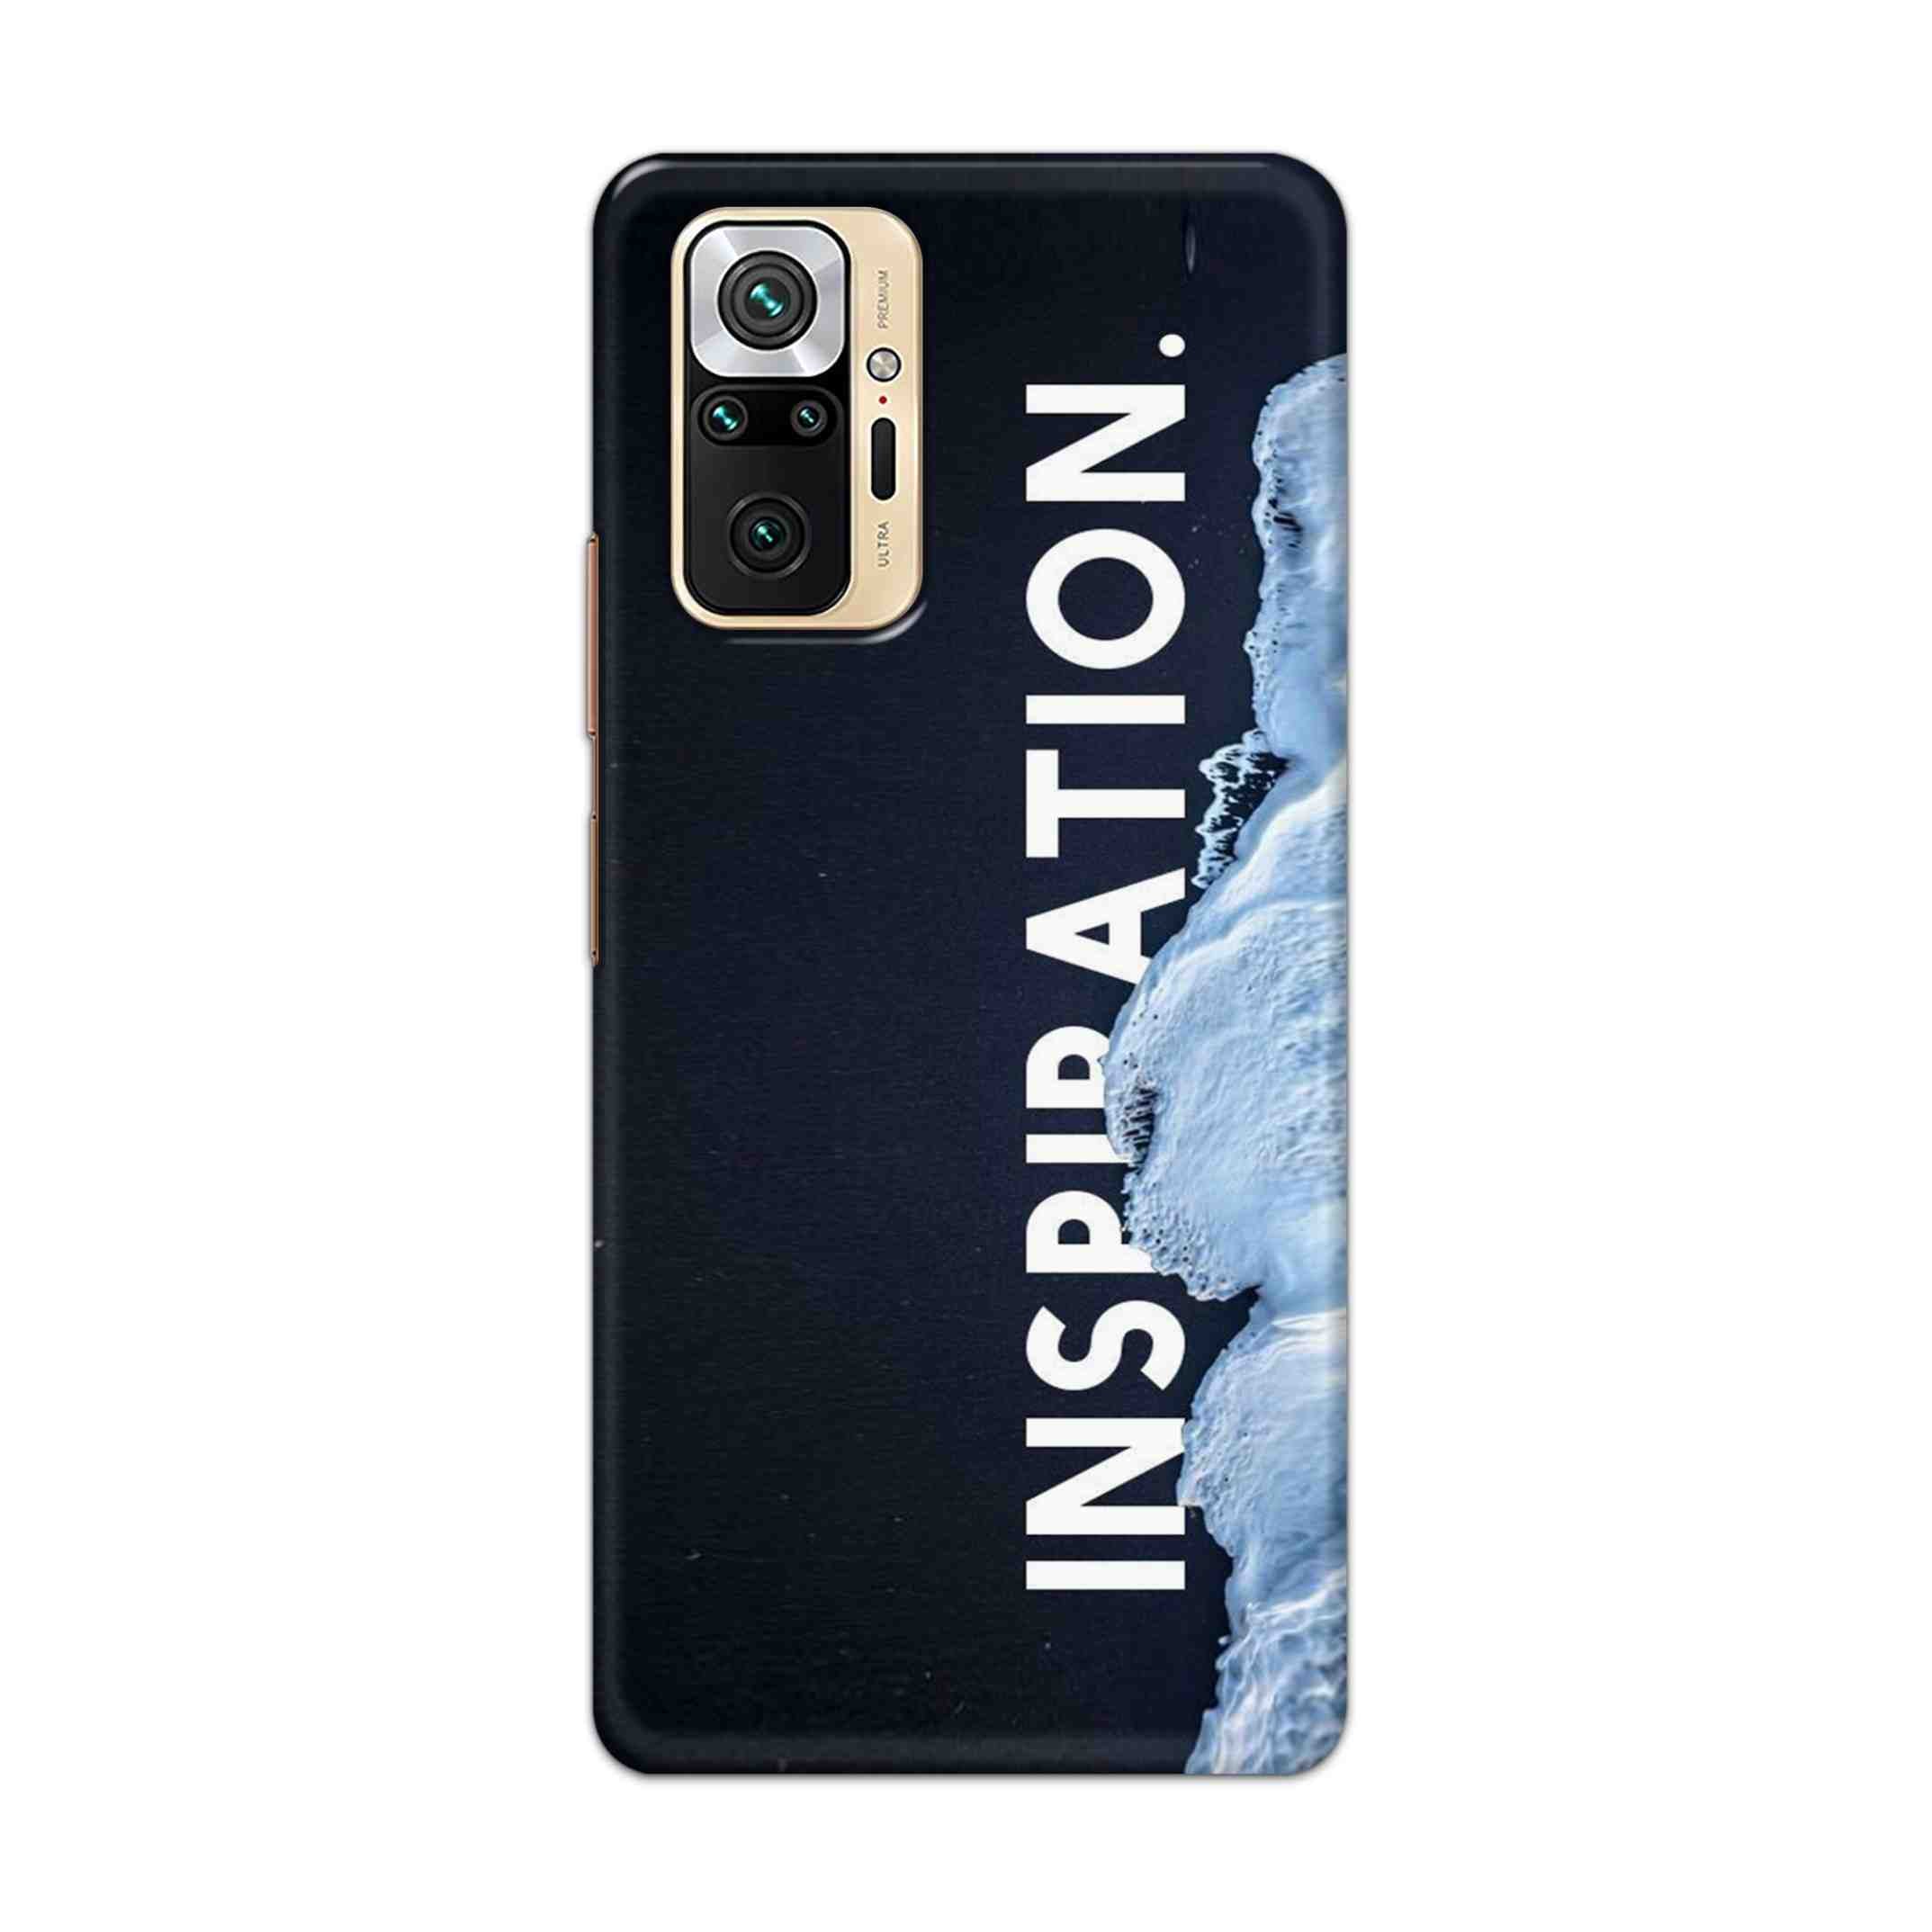 Buy Inspiration Hard Back Mobile Phone Case Cover For Redmi Note 10 Pro Max Online